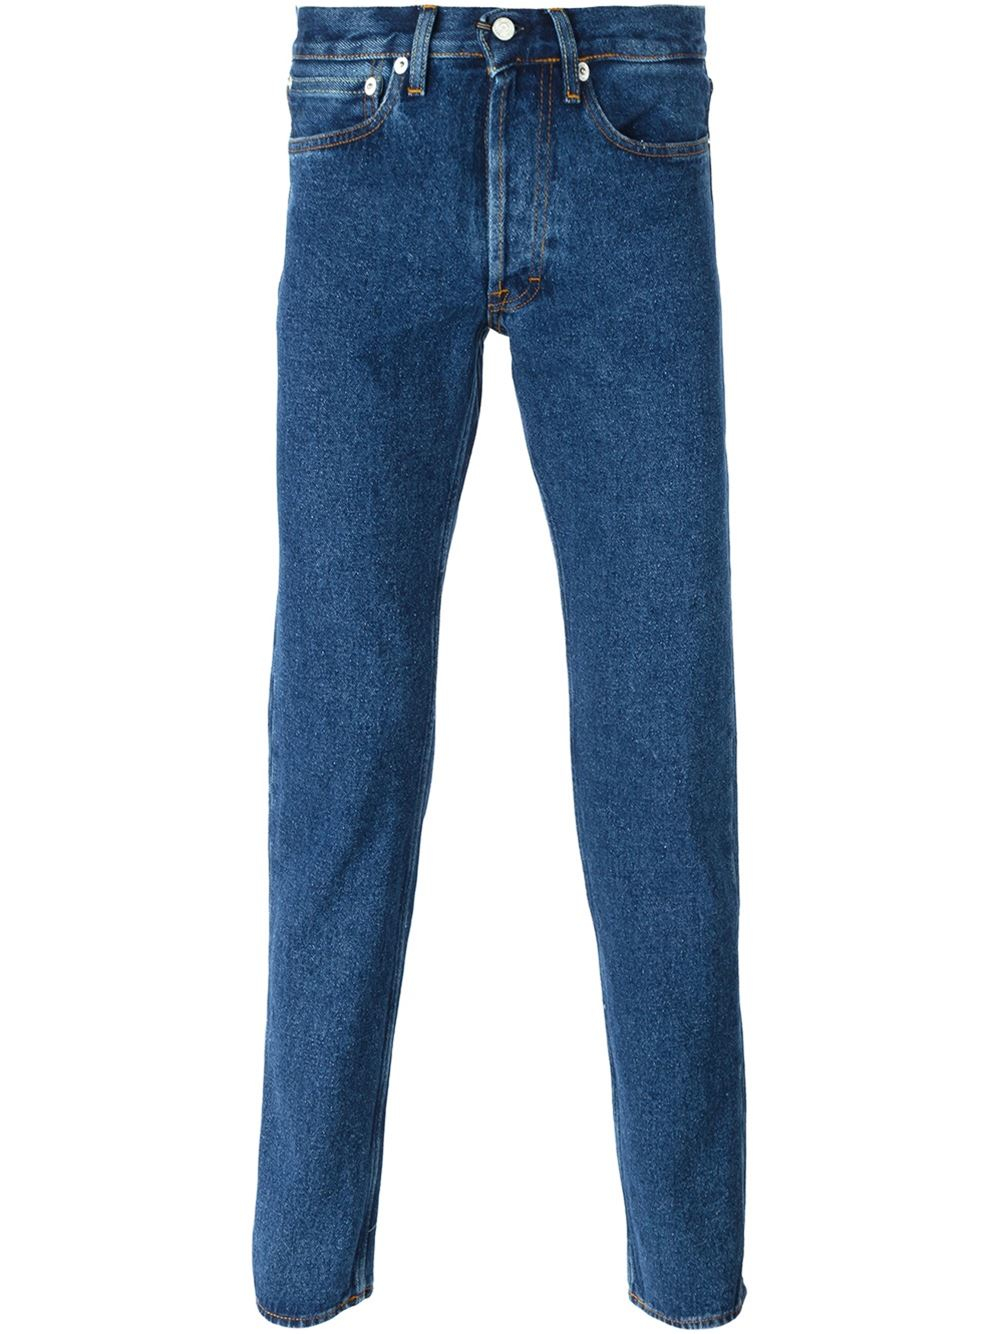 Lyst - Our Legacy 'first Cut' Stonewashed Jeans in Blue for Men